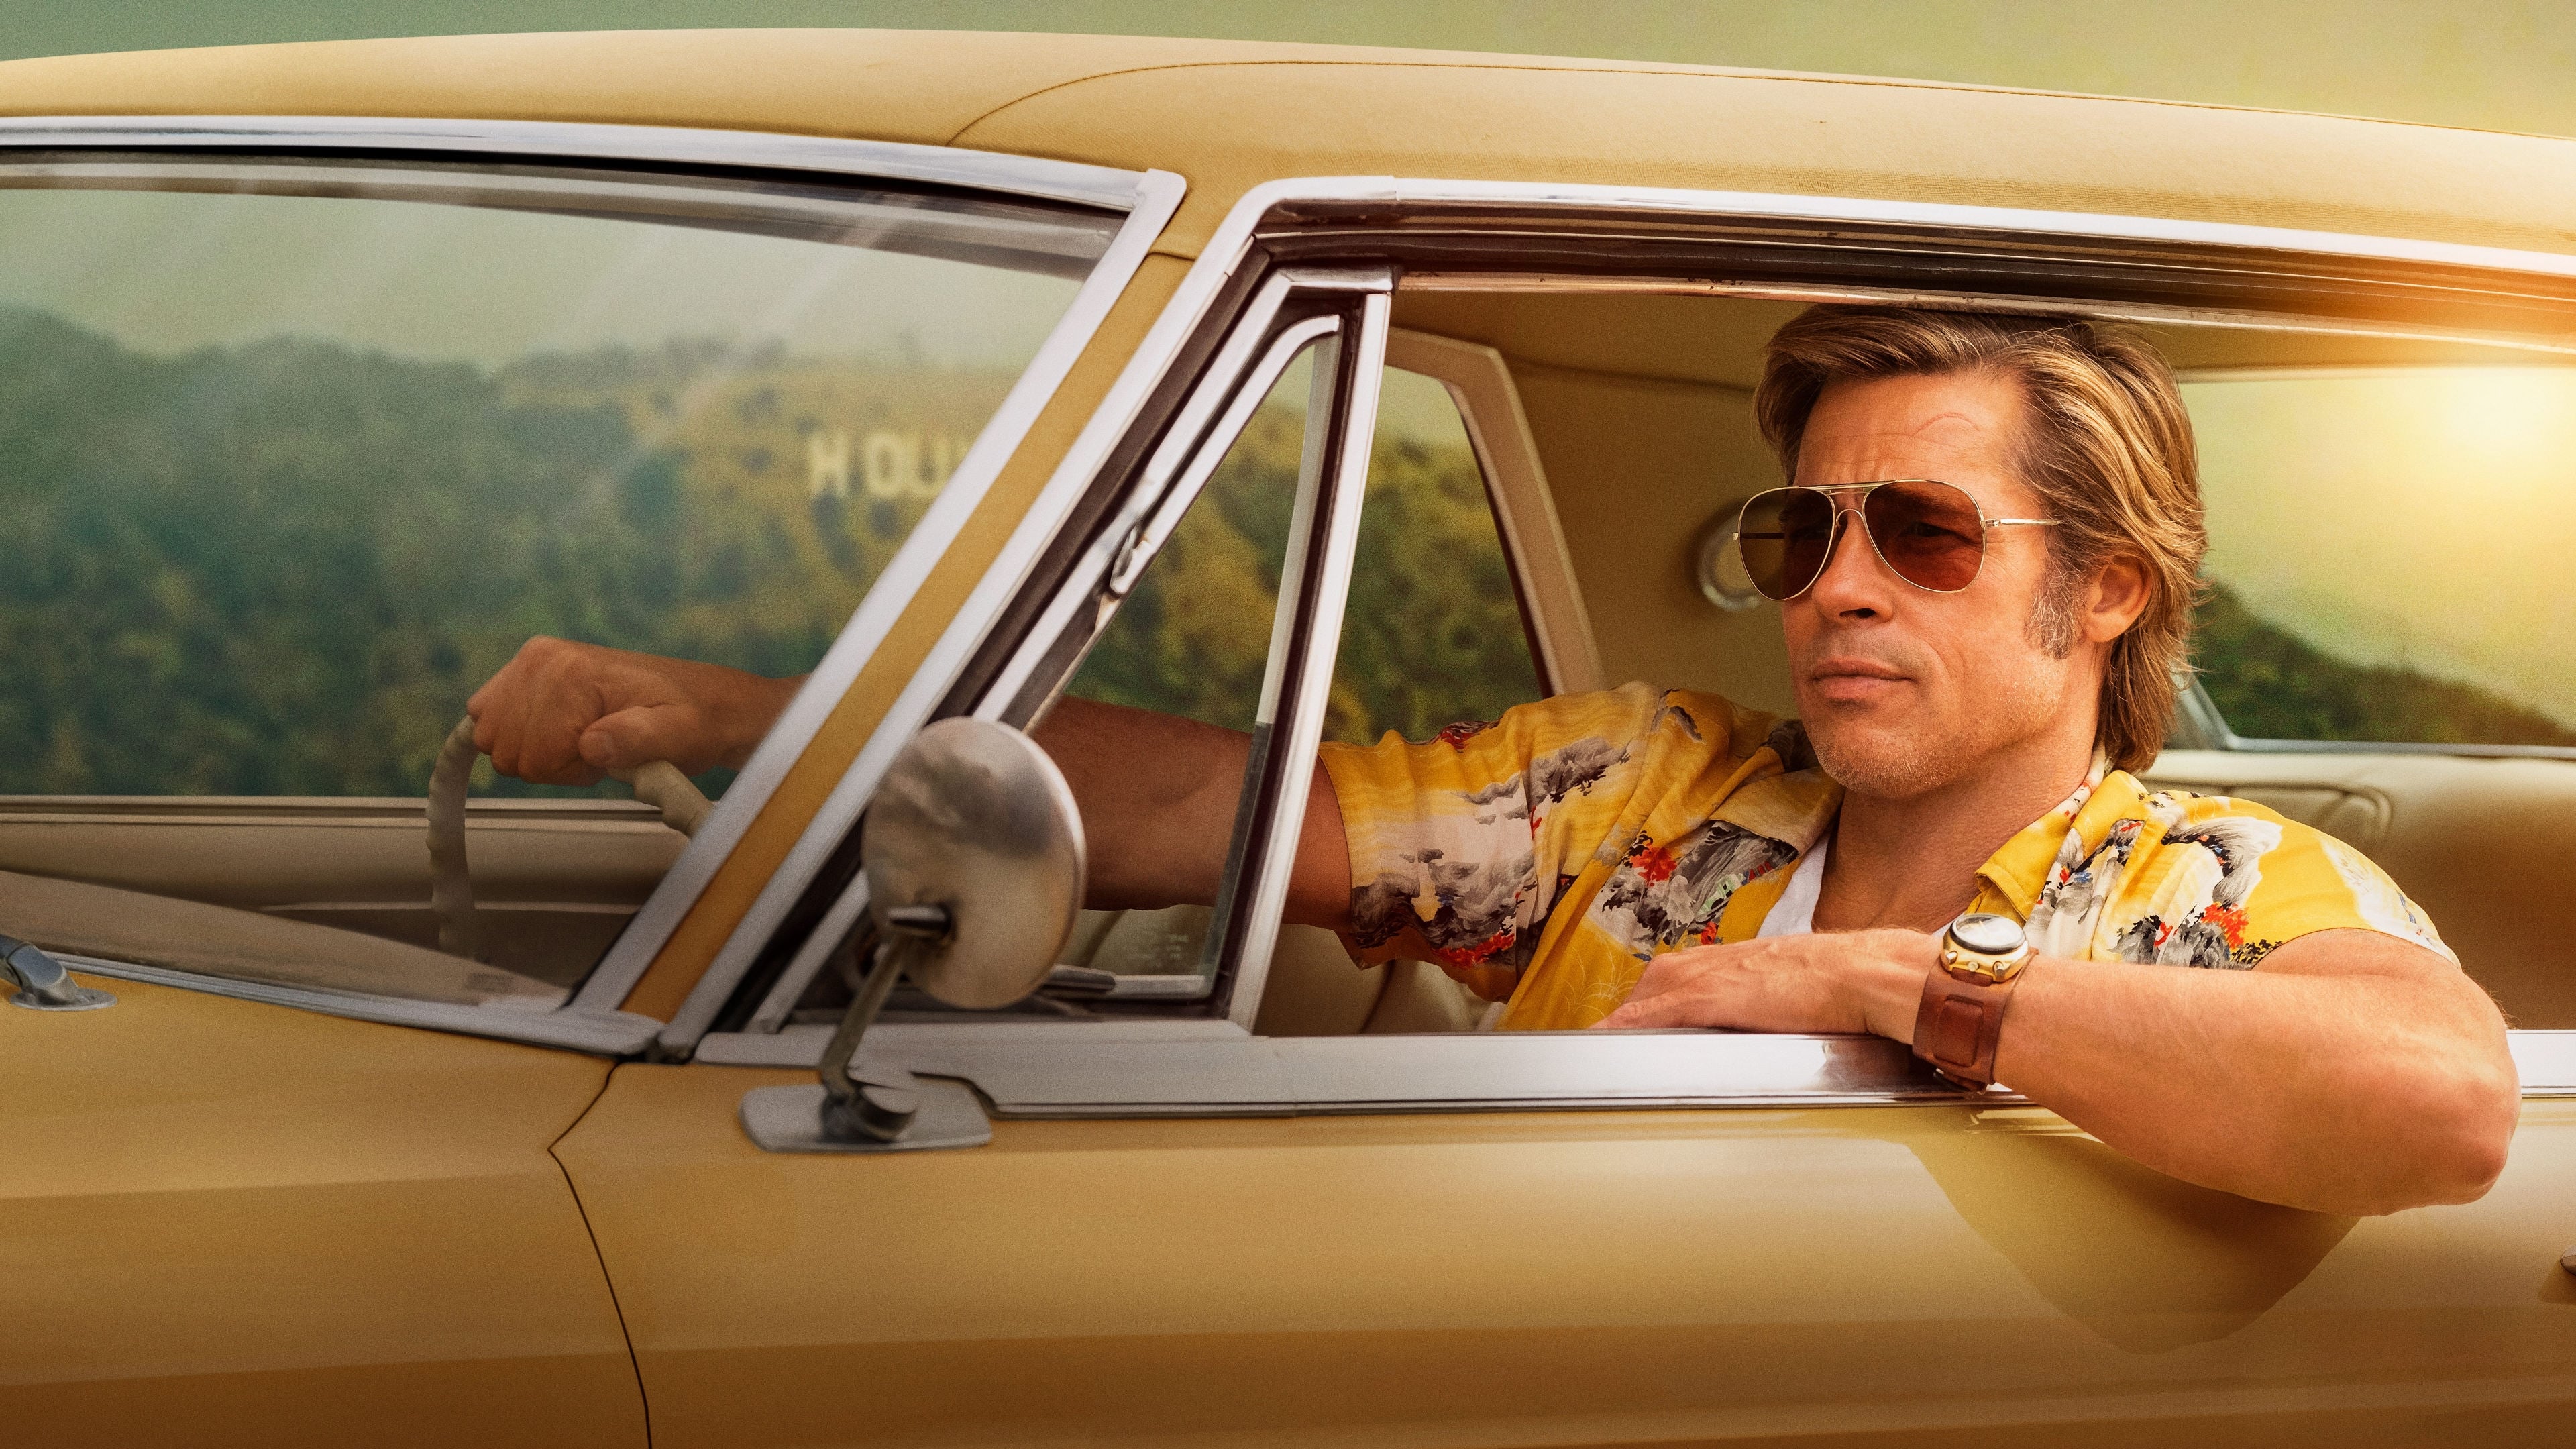 Image du film Once Upon a Time... in Hollywood ngjpqcan2nkedoeflli5divsqoqjpg